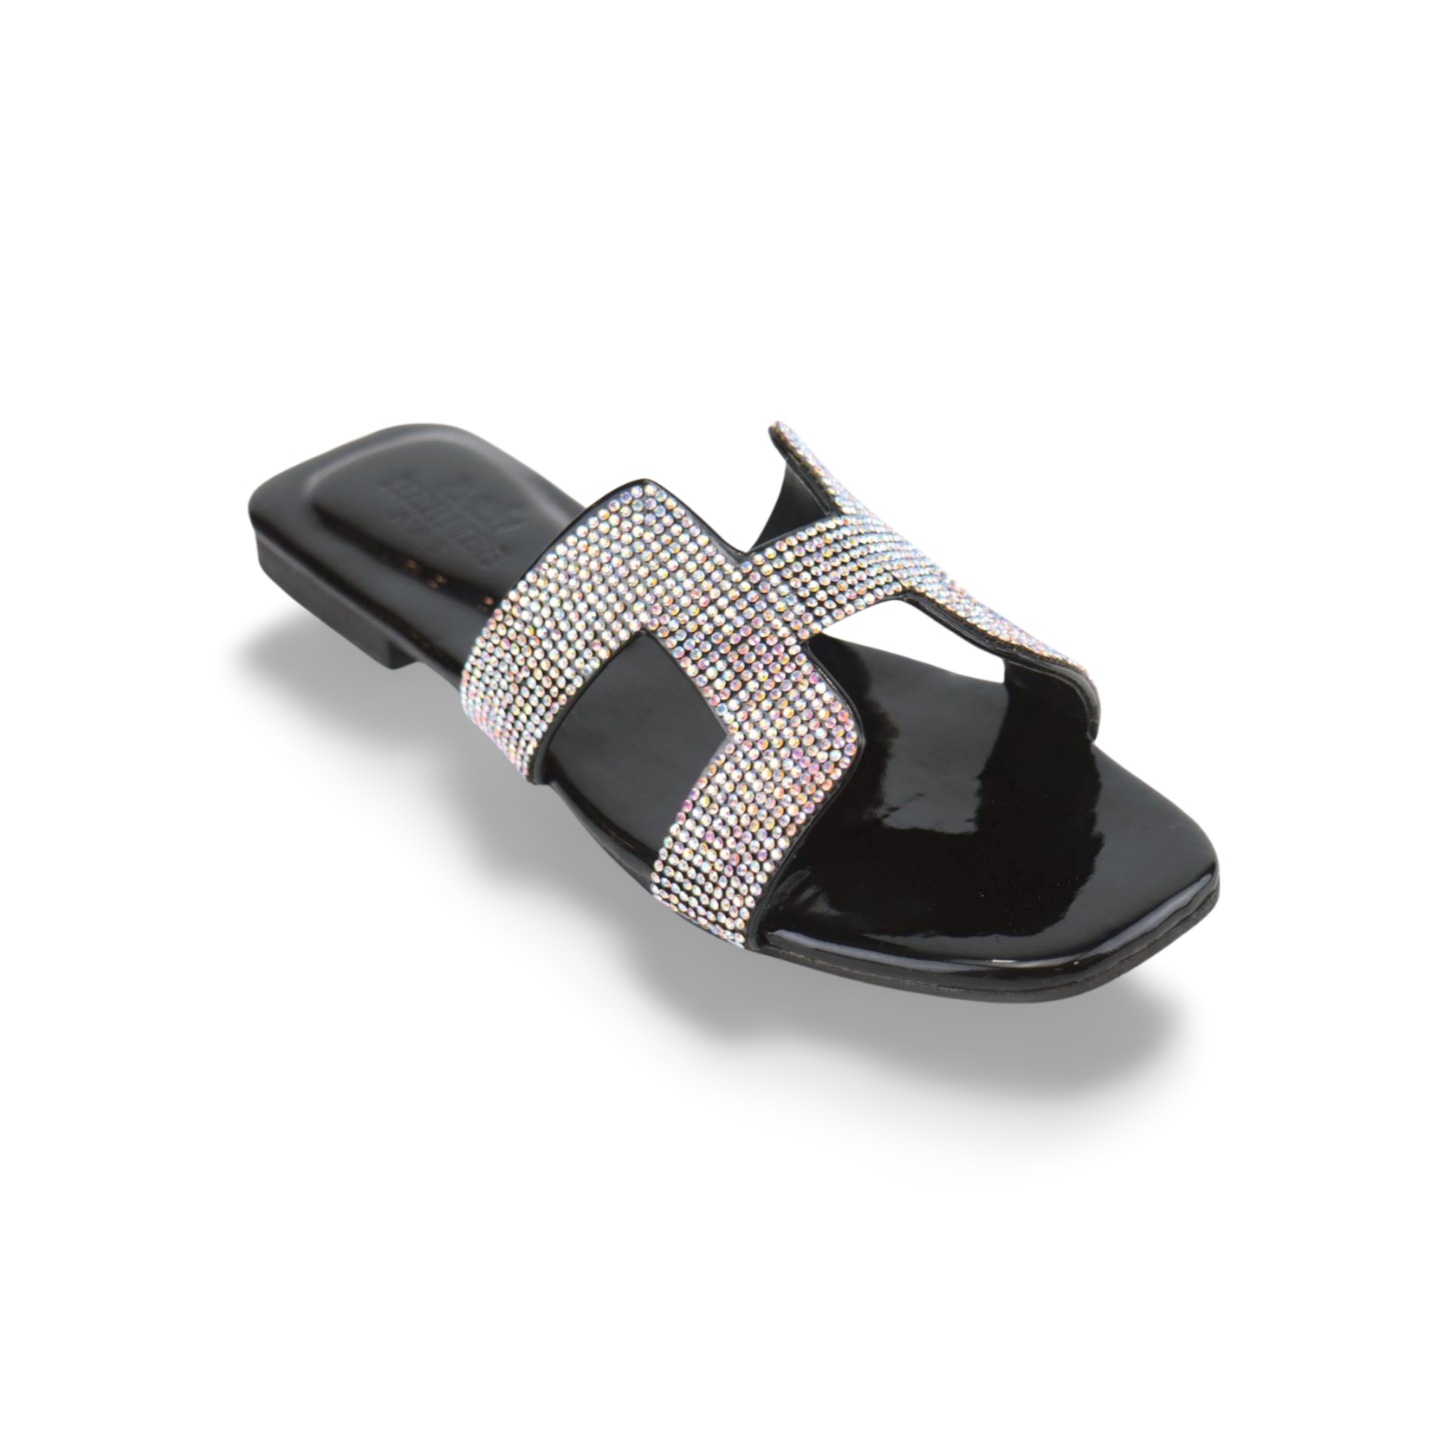 Iconic Style with a Dazzling Oran Sandals with Rhinestones